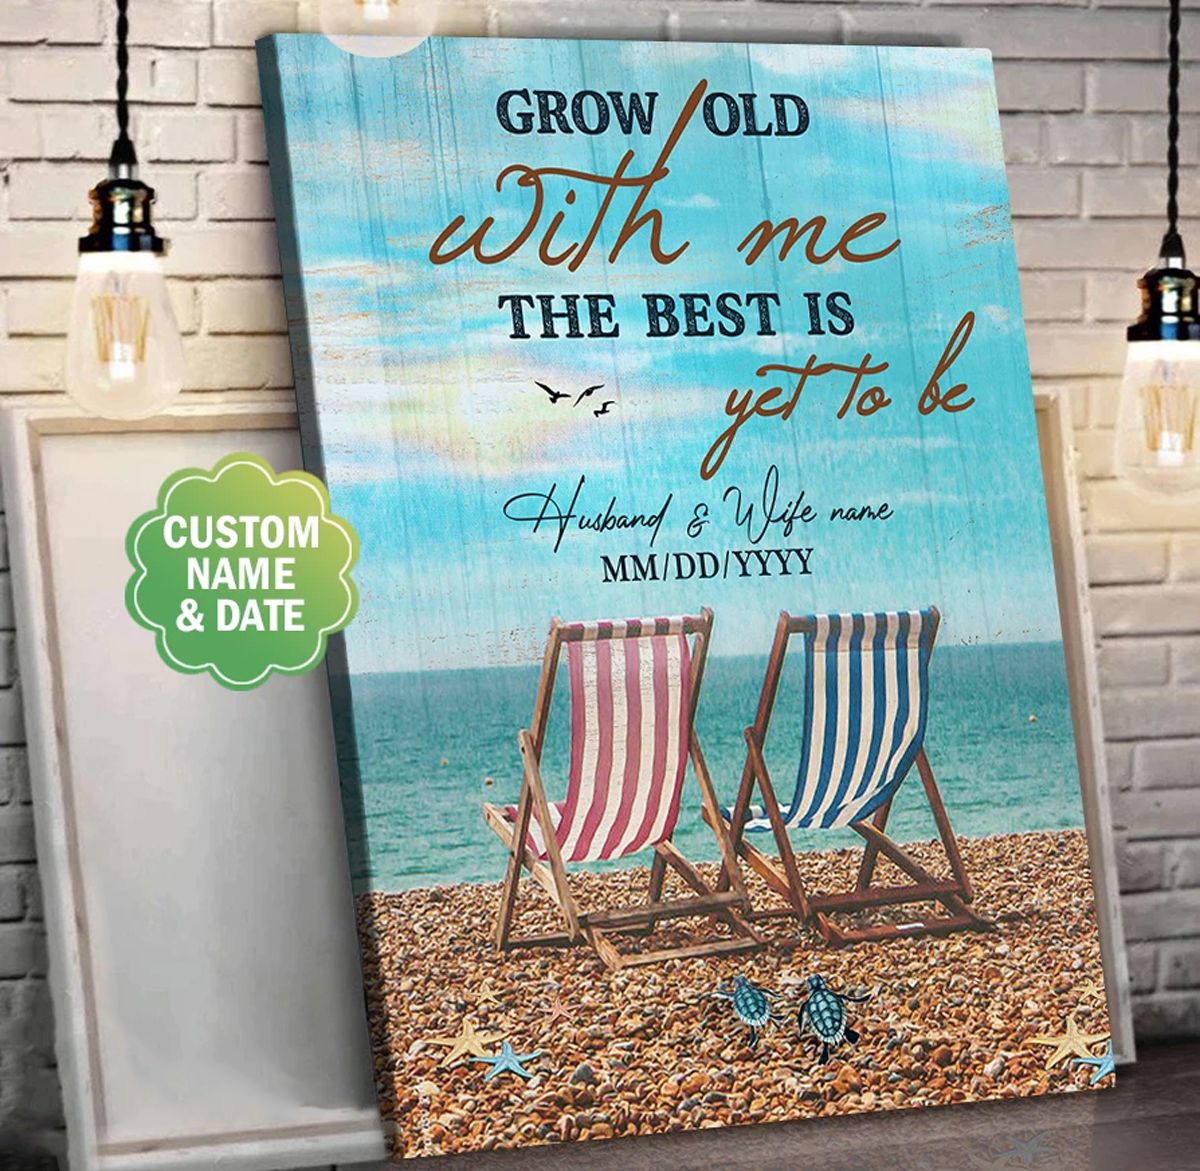 Personalized Valentine Day Gifts For Couple Canvas Grow Old With Me The Best Is Yet To Be Beach PAN